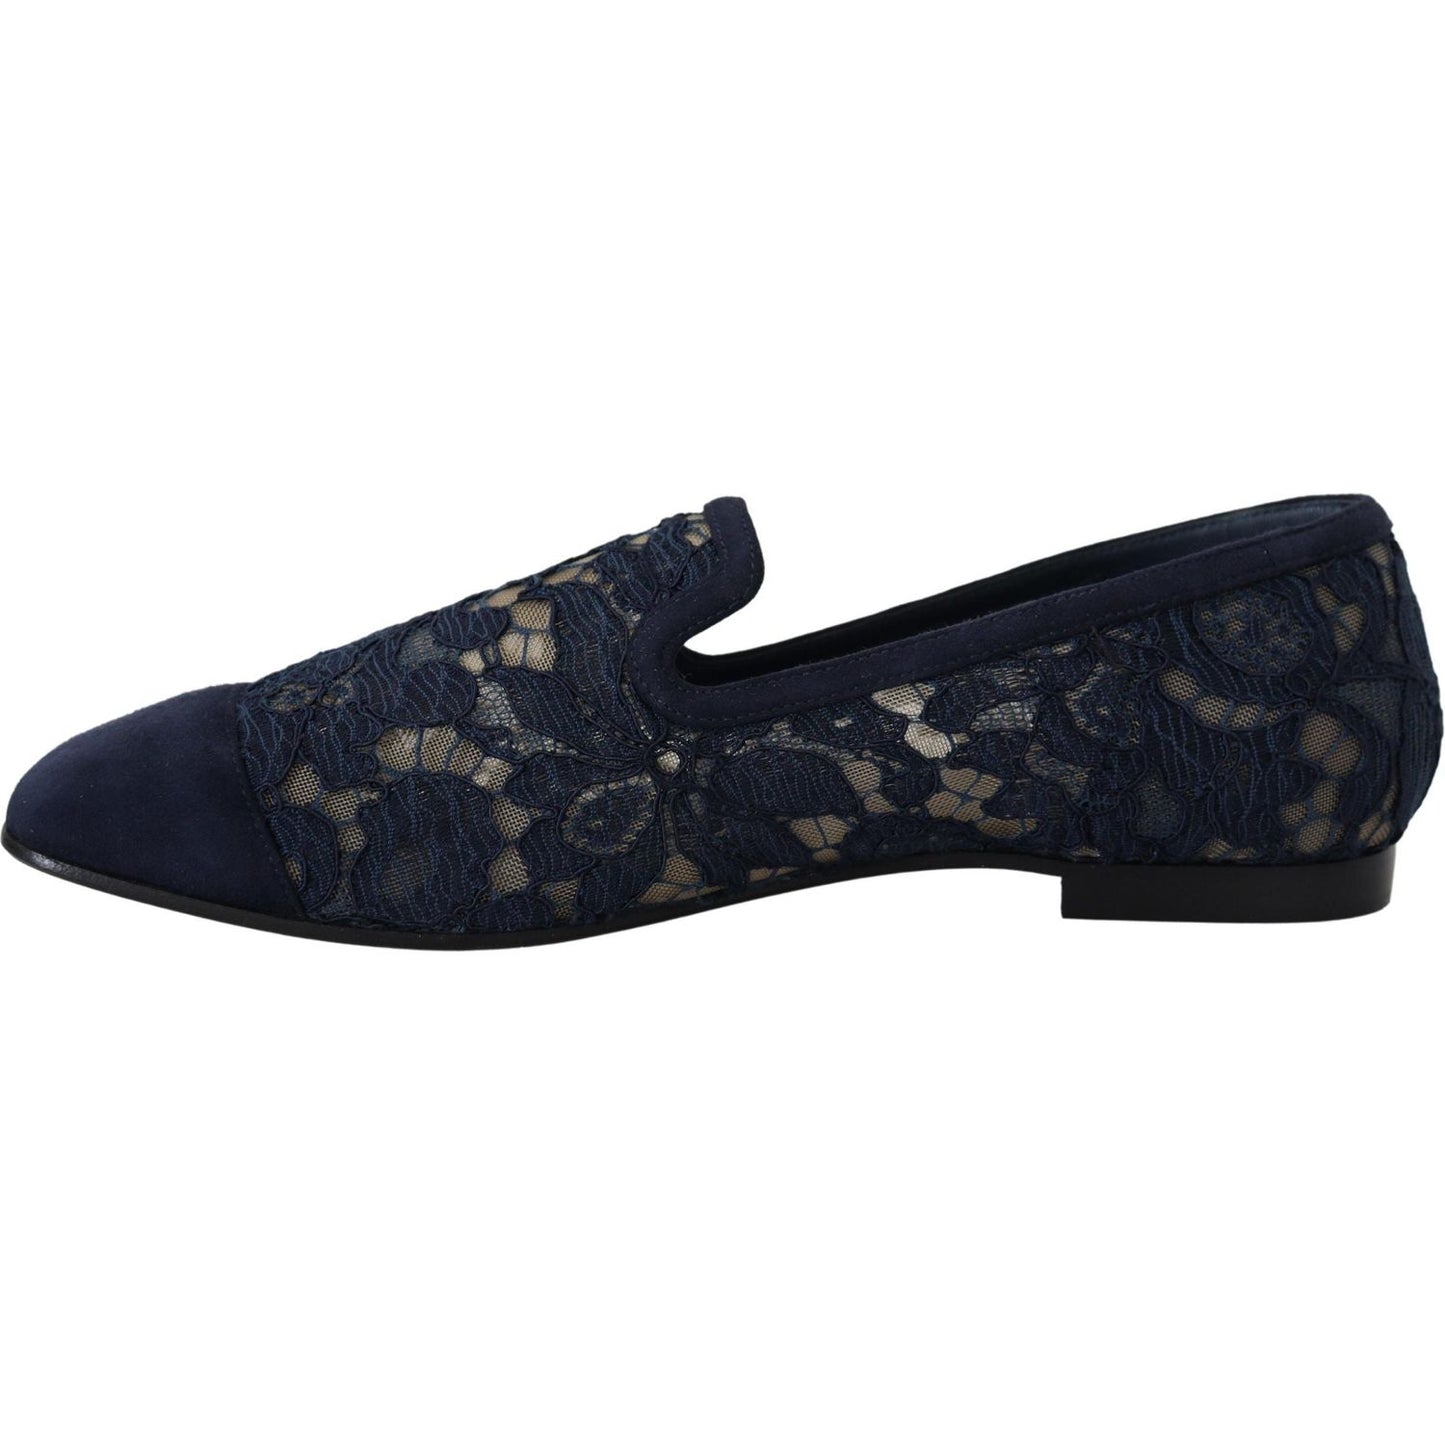 Dolce & Gabbana Elegant Blue Loafers Flats - Summer Chic blue-floral-lace-slip-ons-loafers-flats-shoes